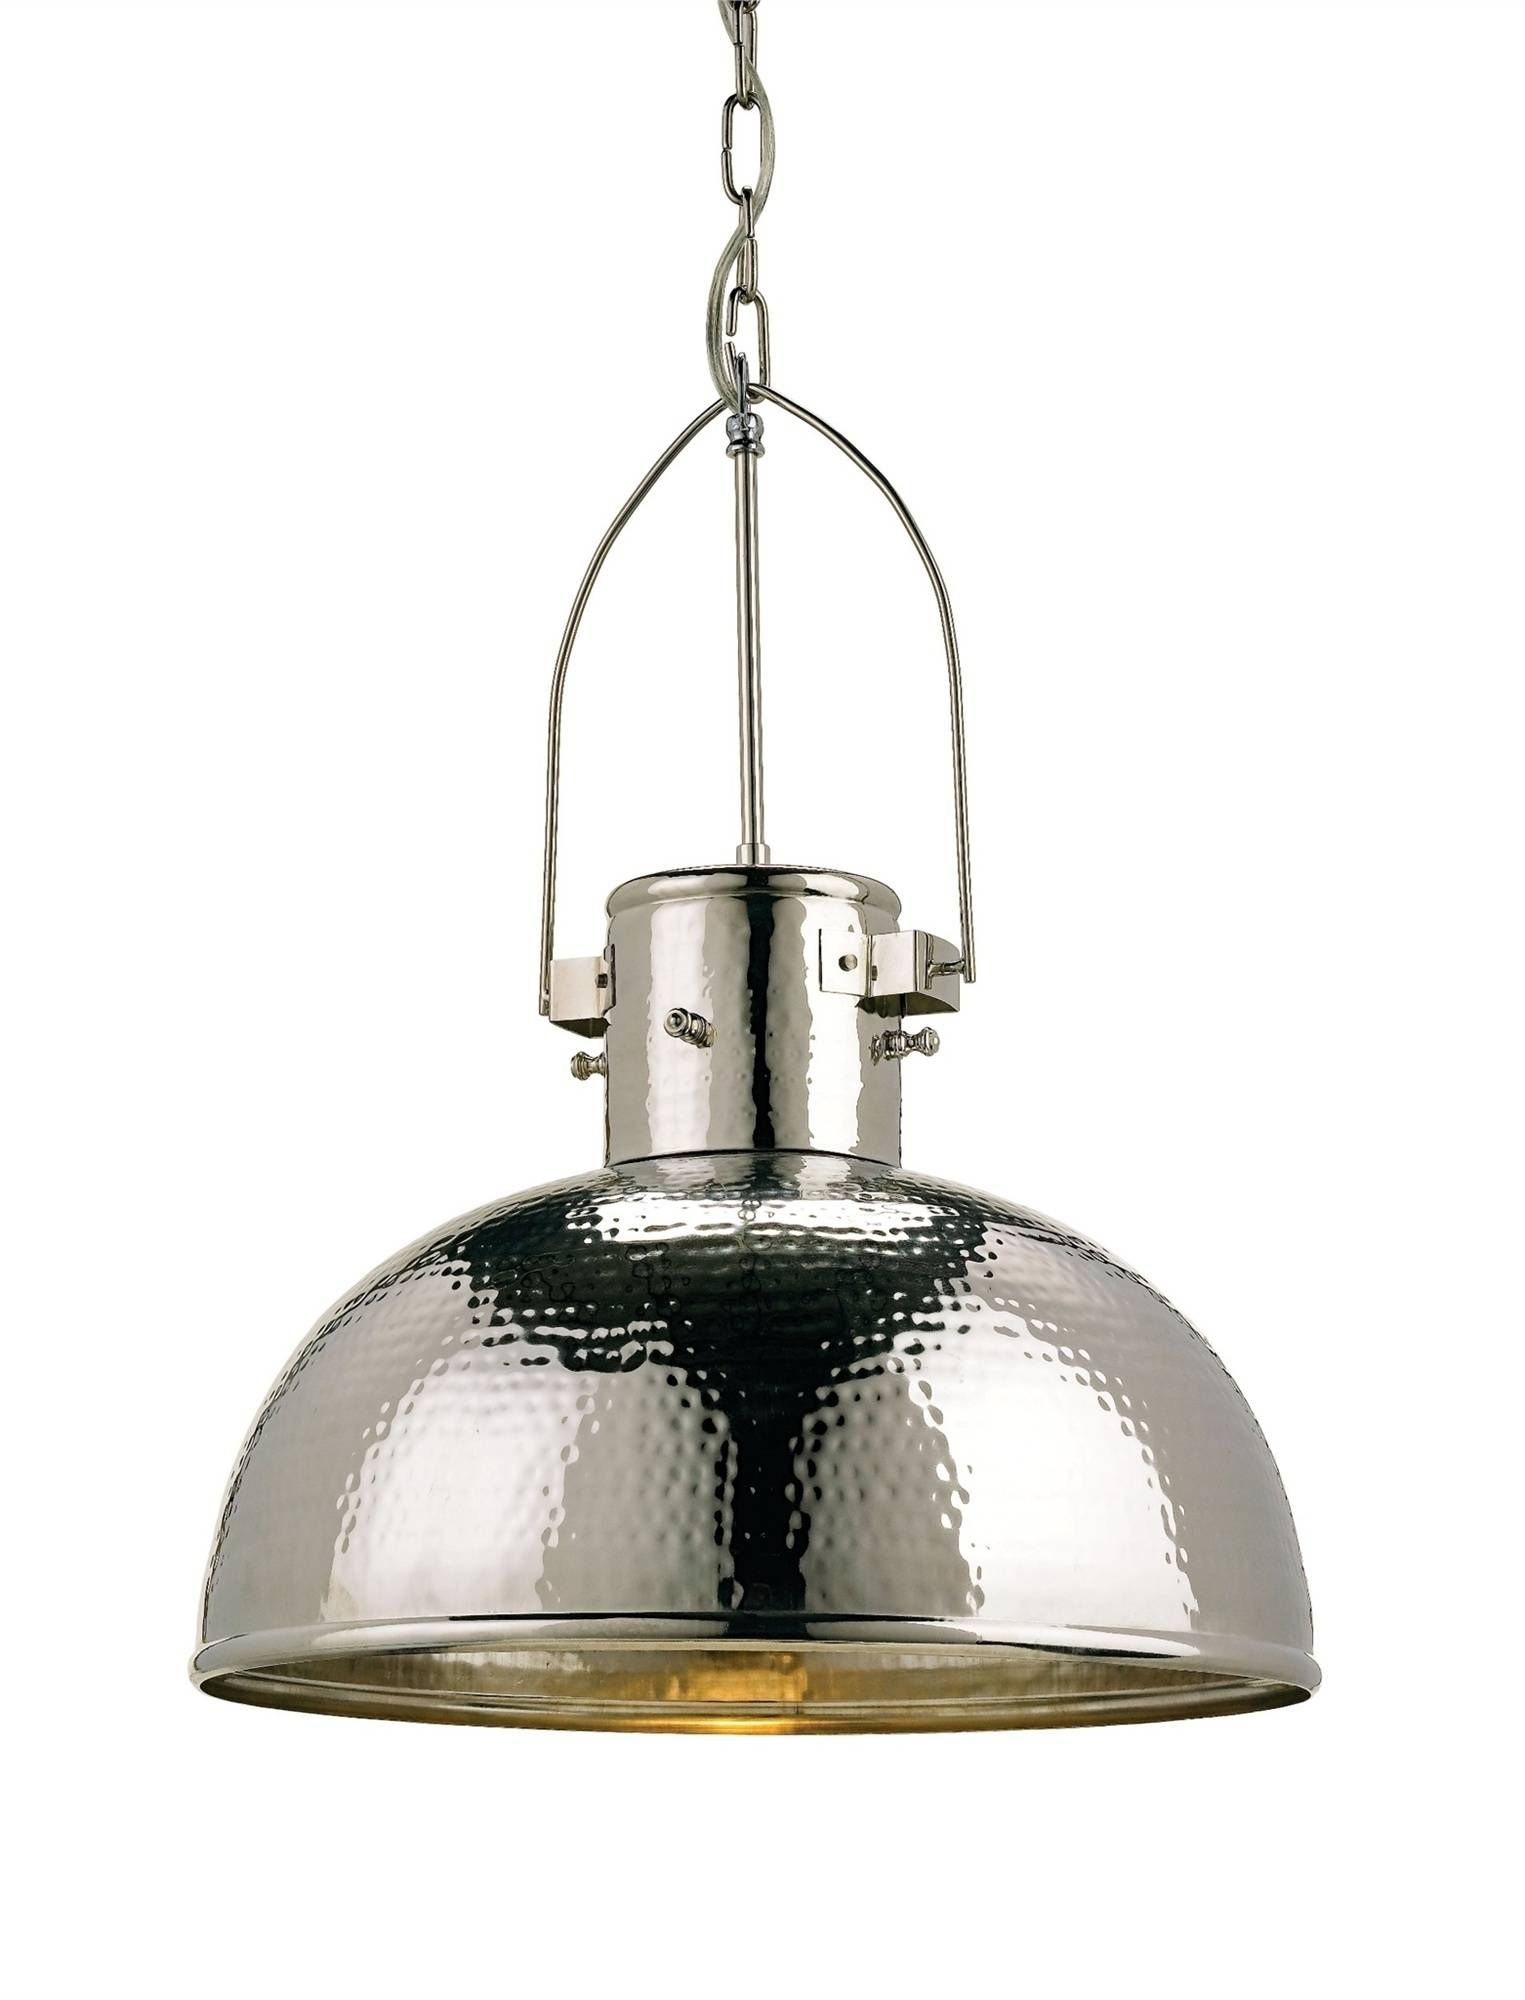 Syllabus Pendant Light | Currey And Company With Regard To Hammered Metal Pendant Lights (View 3 of 15)